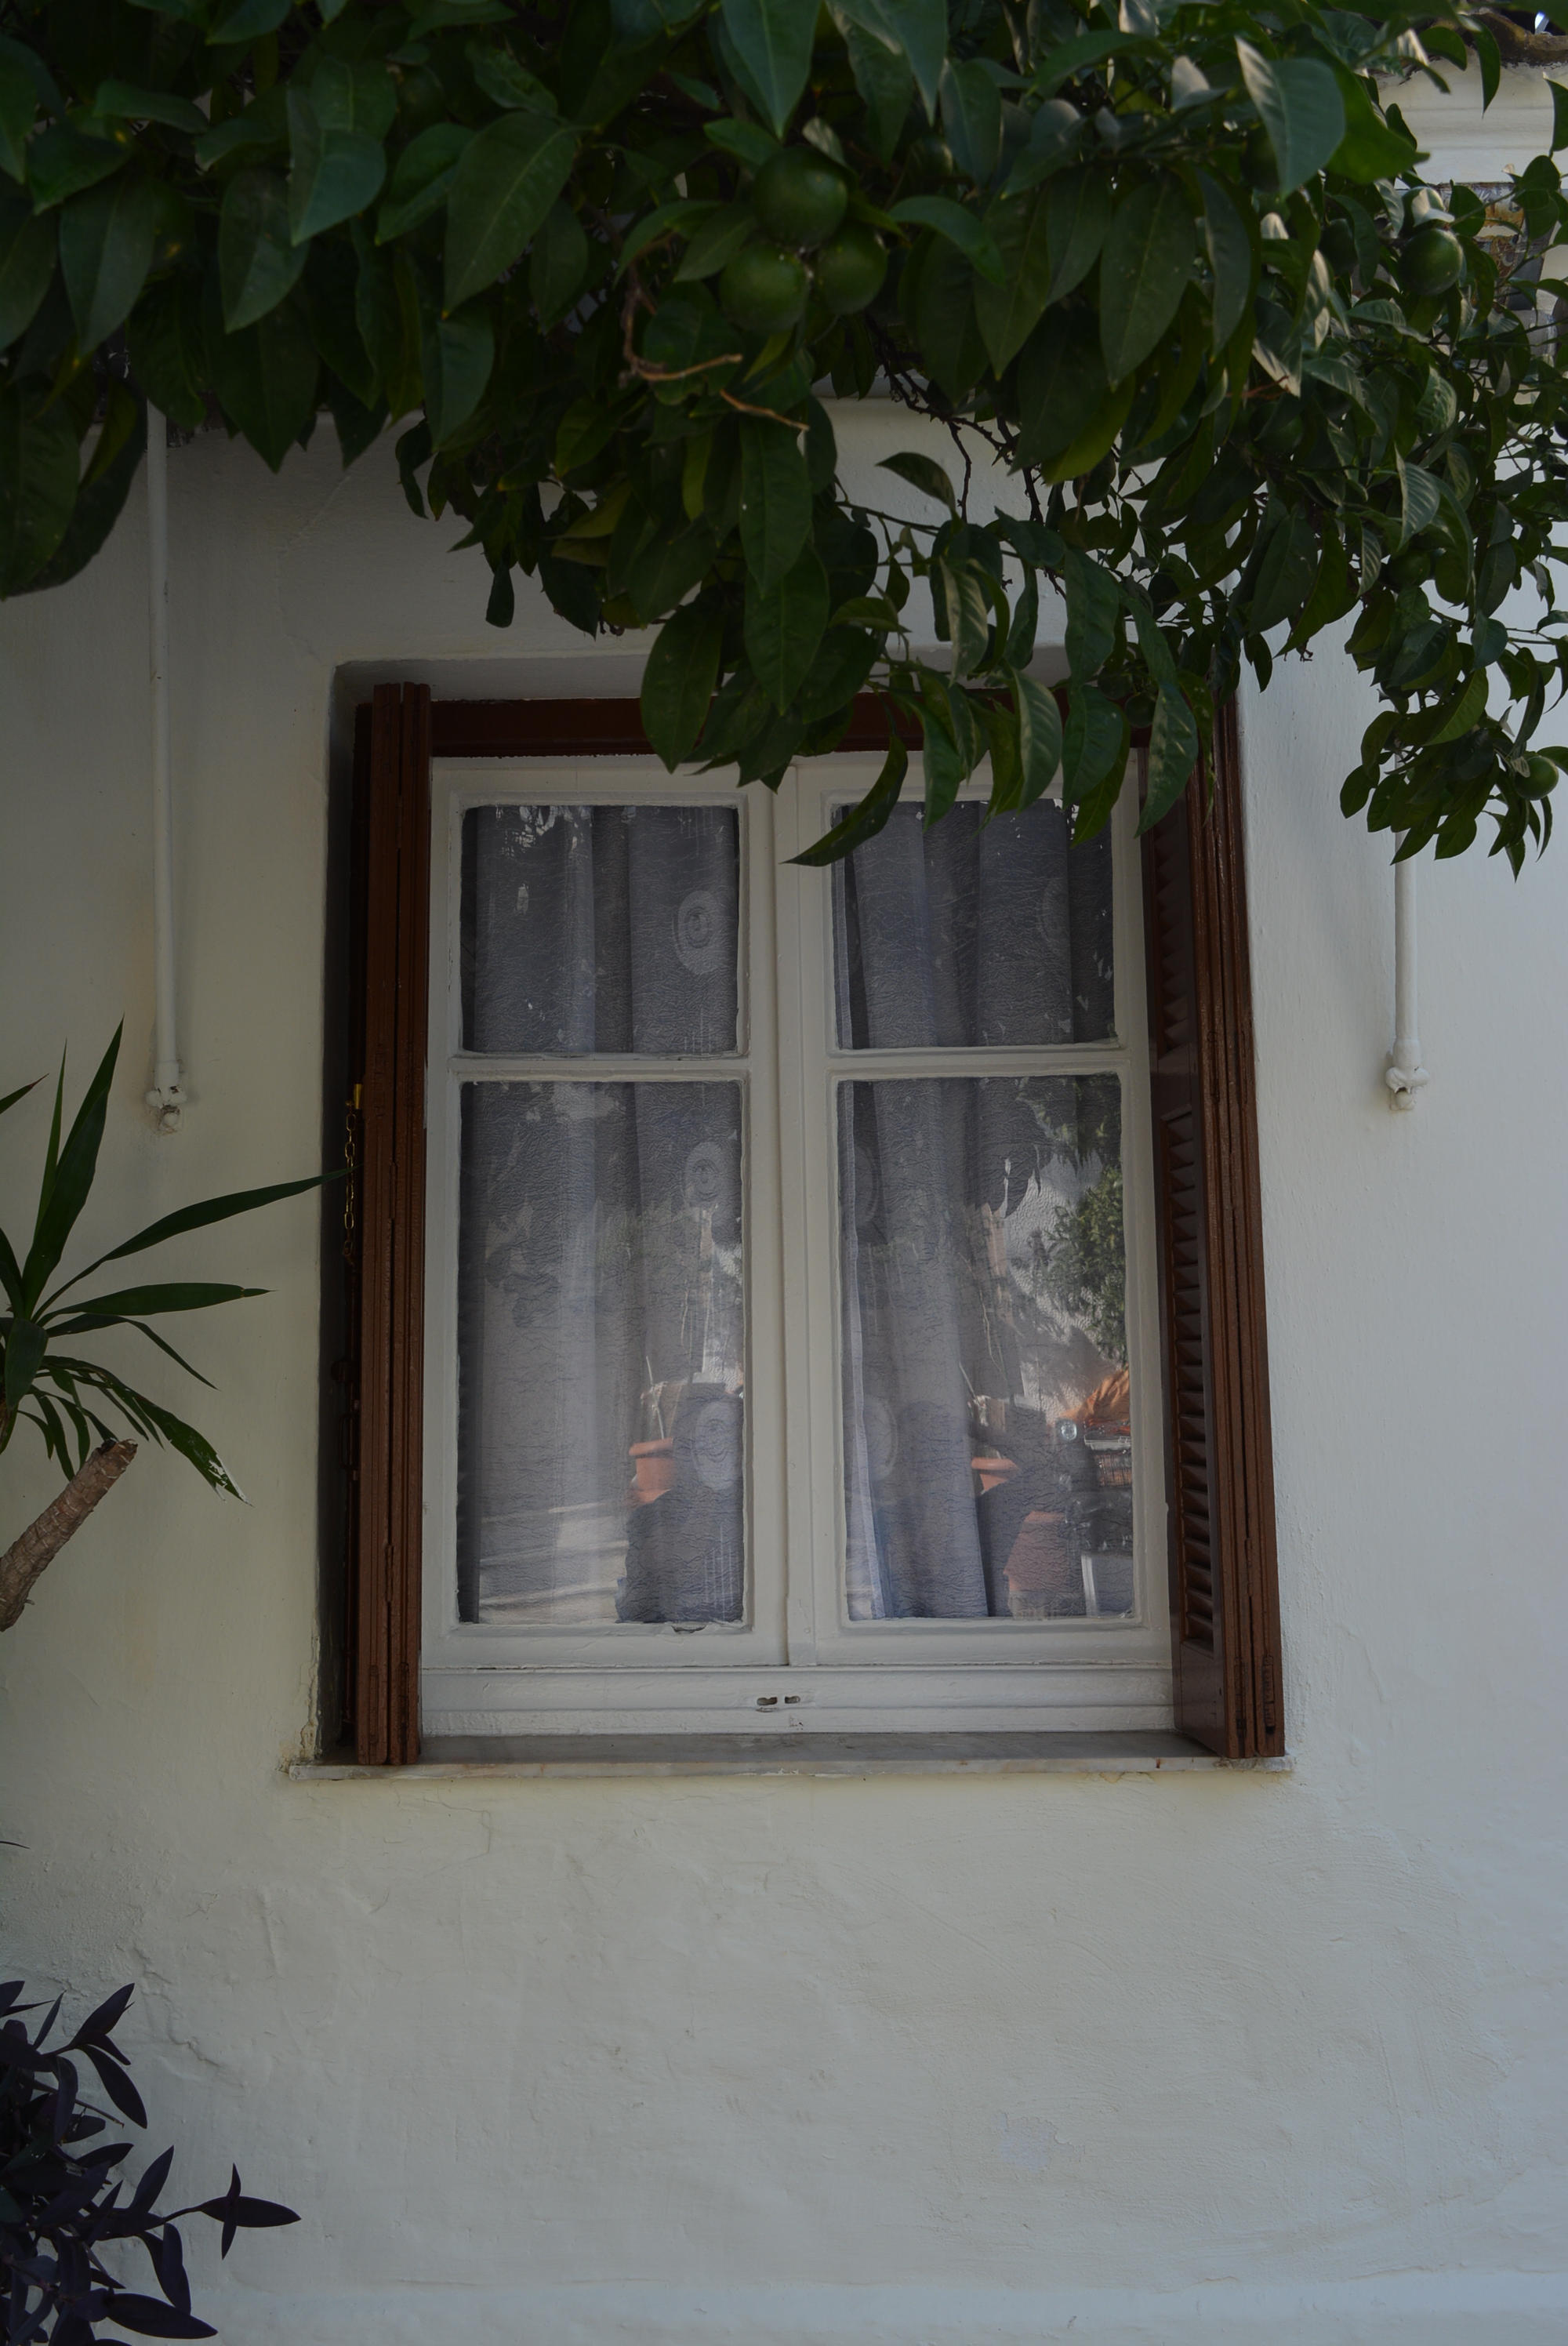 View of the window (2015)